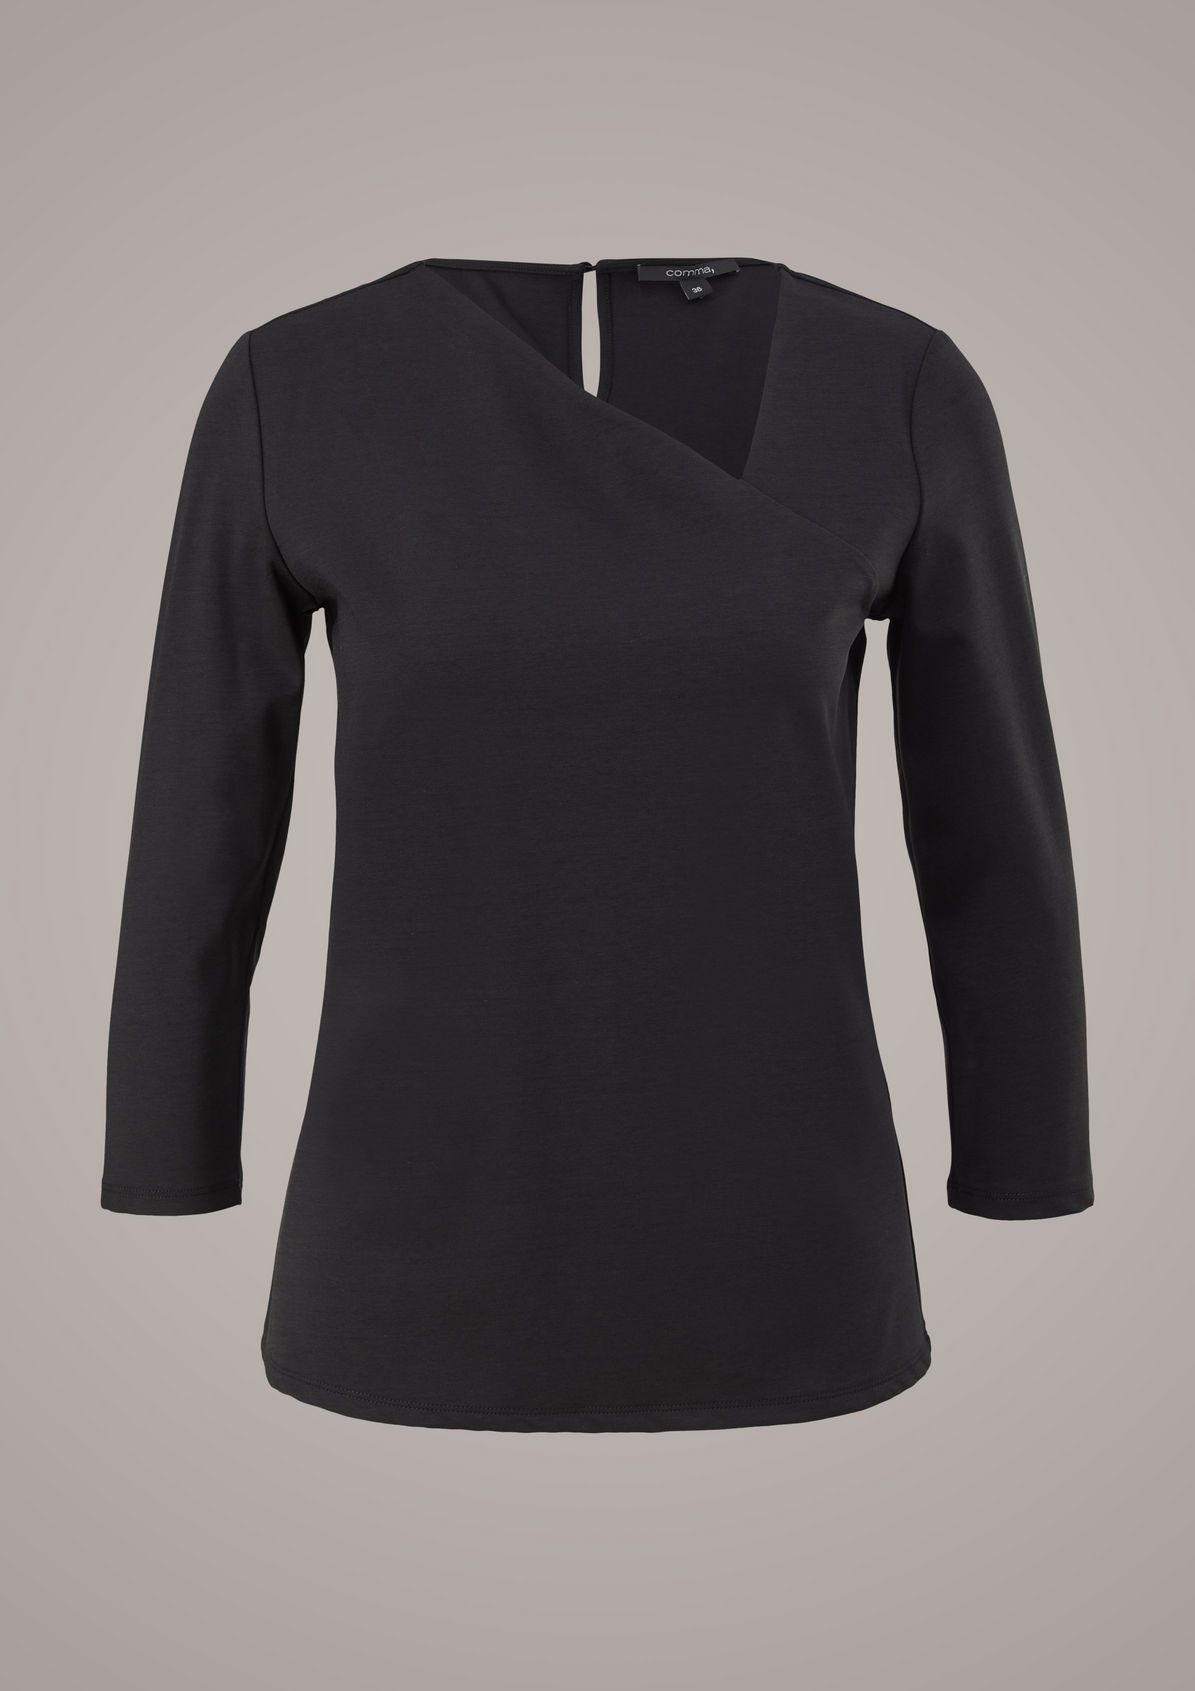 Ponte di Roma jersey top from comma